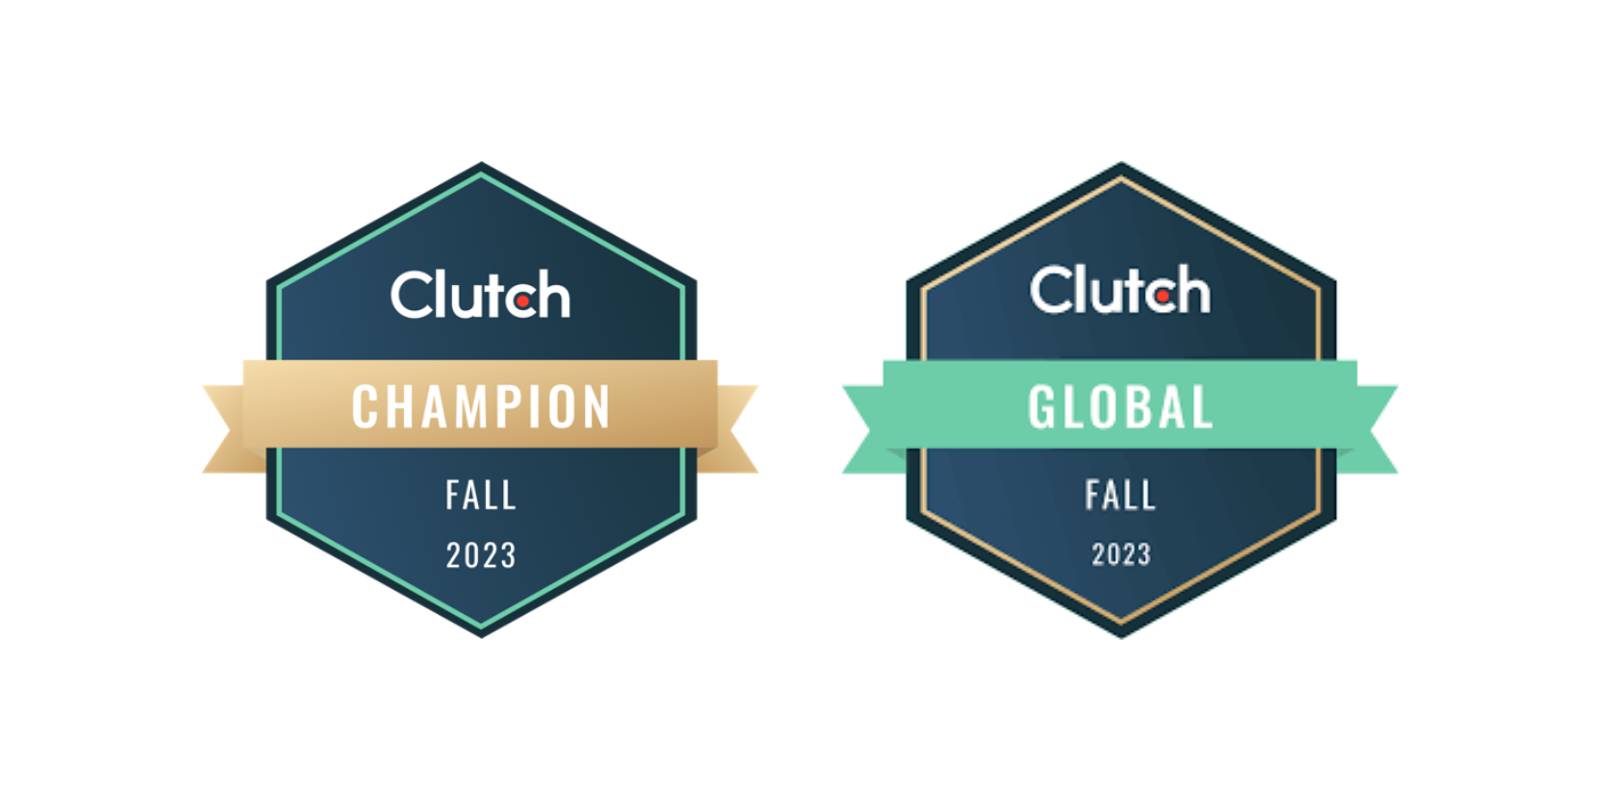 Clutch global and champion